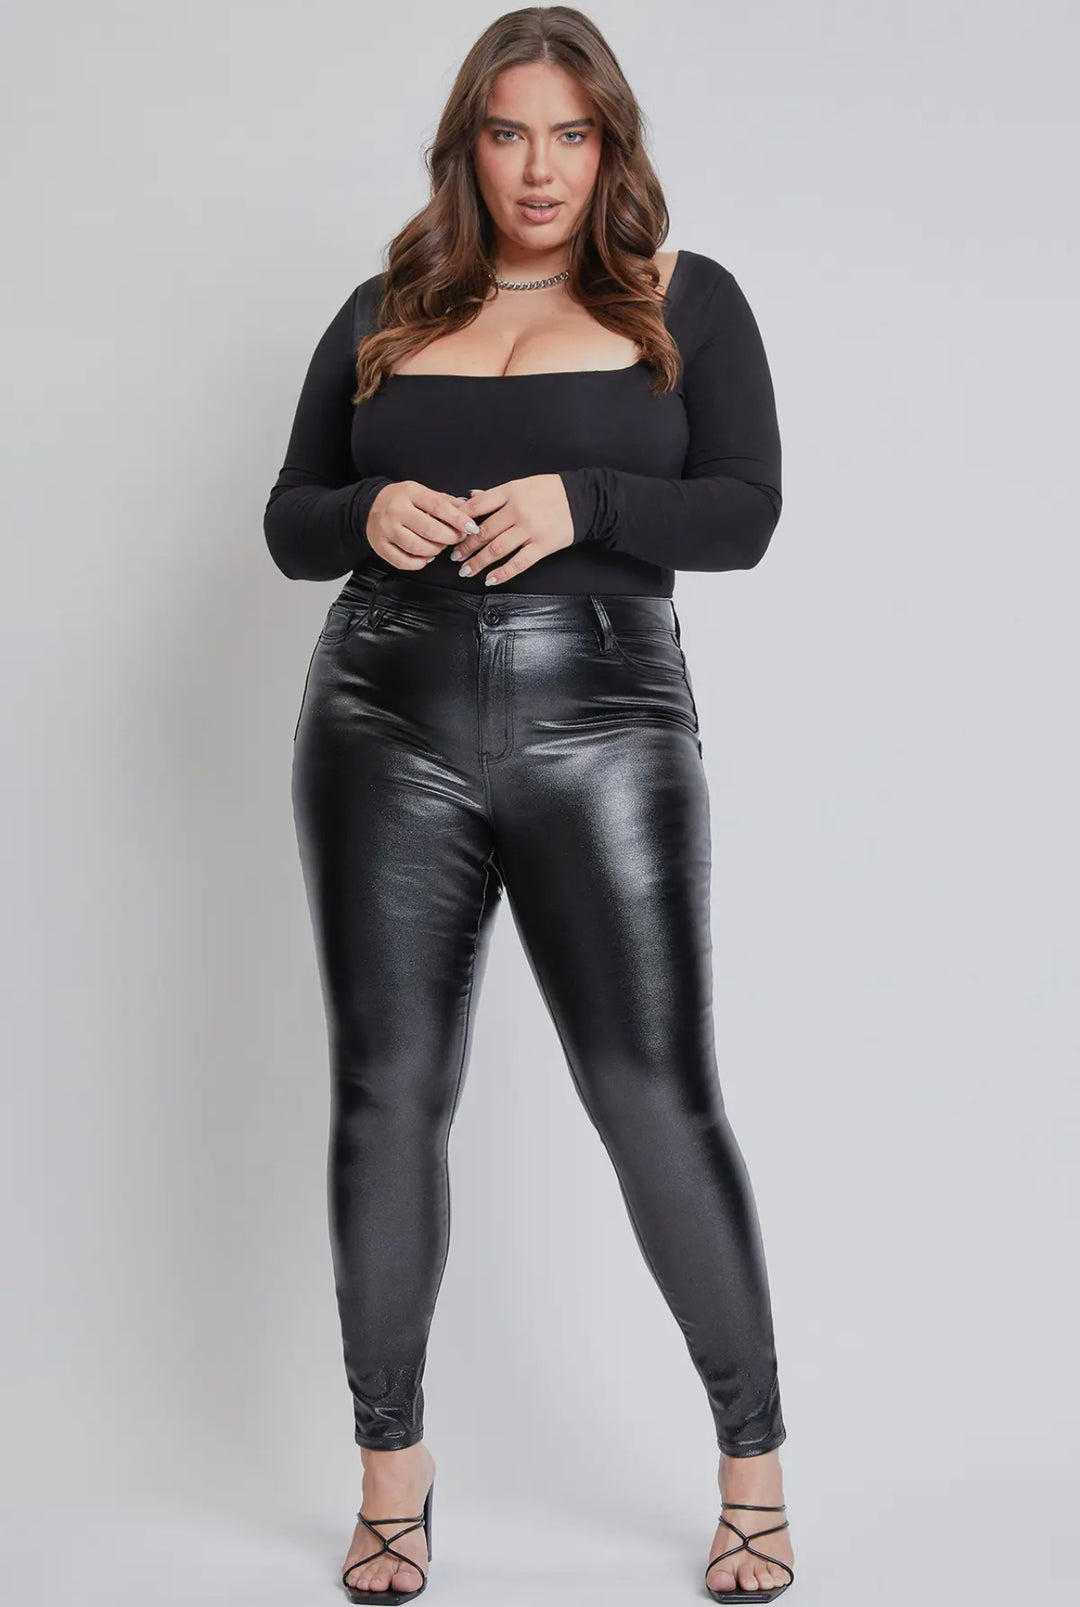 Jazzy YMI High Rise Metallic Skinny Jeans, Black-Pants-Inspired by Justeen-Women's Clothing Boutique in Chicago, Illinois